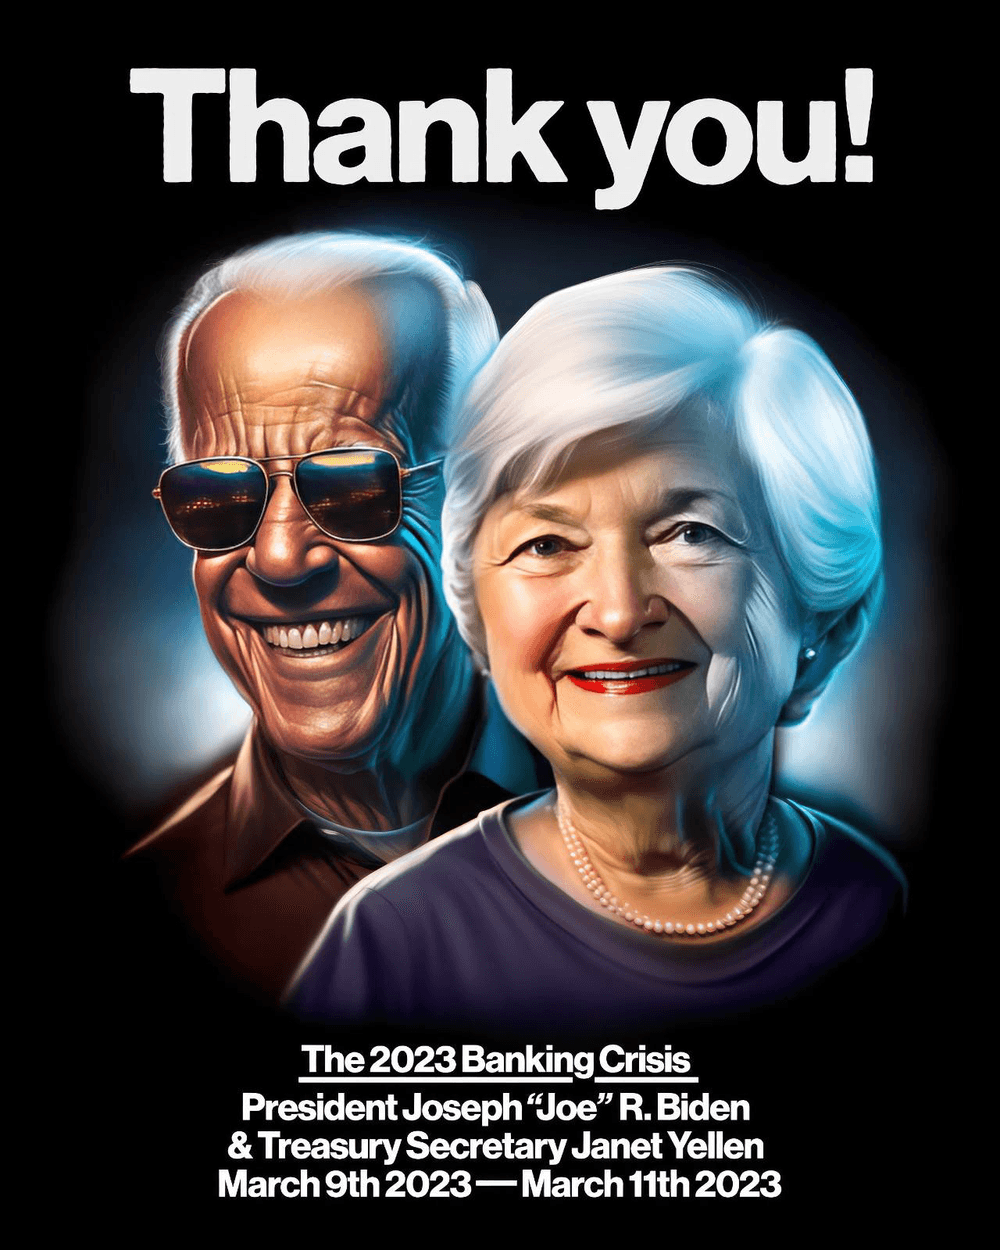 Thank you! The 2023 Banking Crisis #243